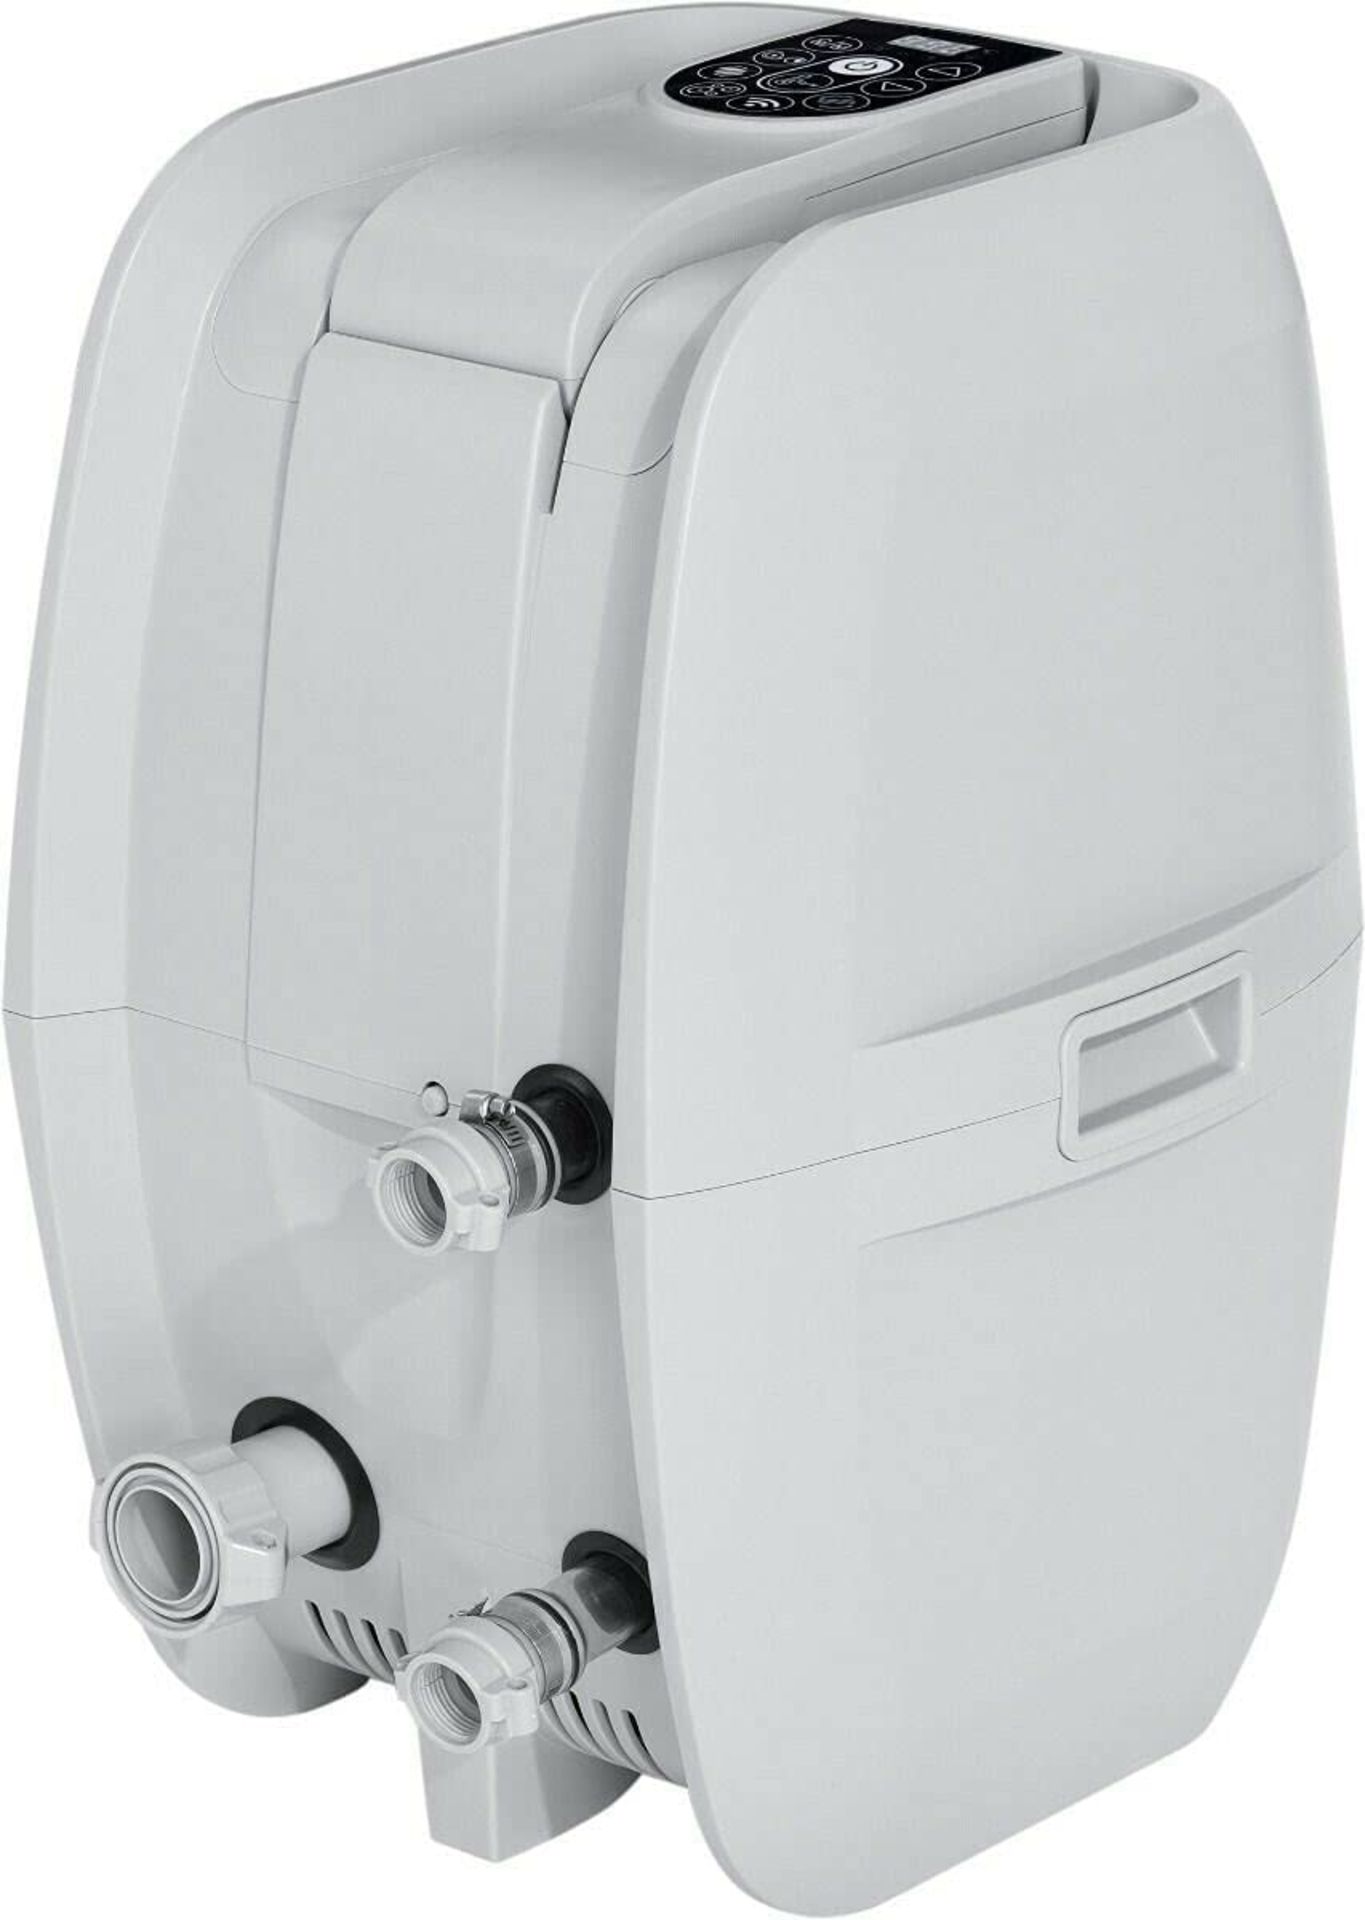 Lay-Z-Spa Heater Pump Unit With Freeze Shield Technology UK Plug. RRP £250.00. - BI. Compatible with